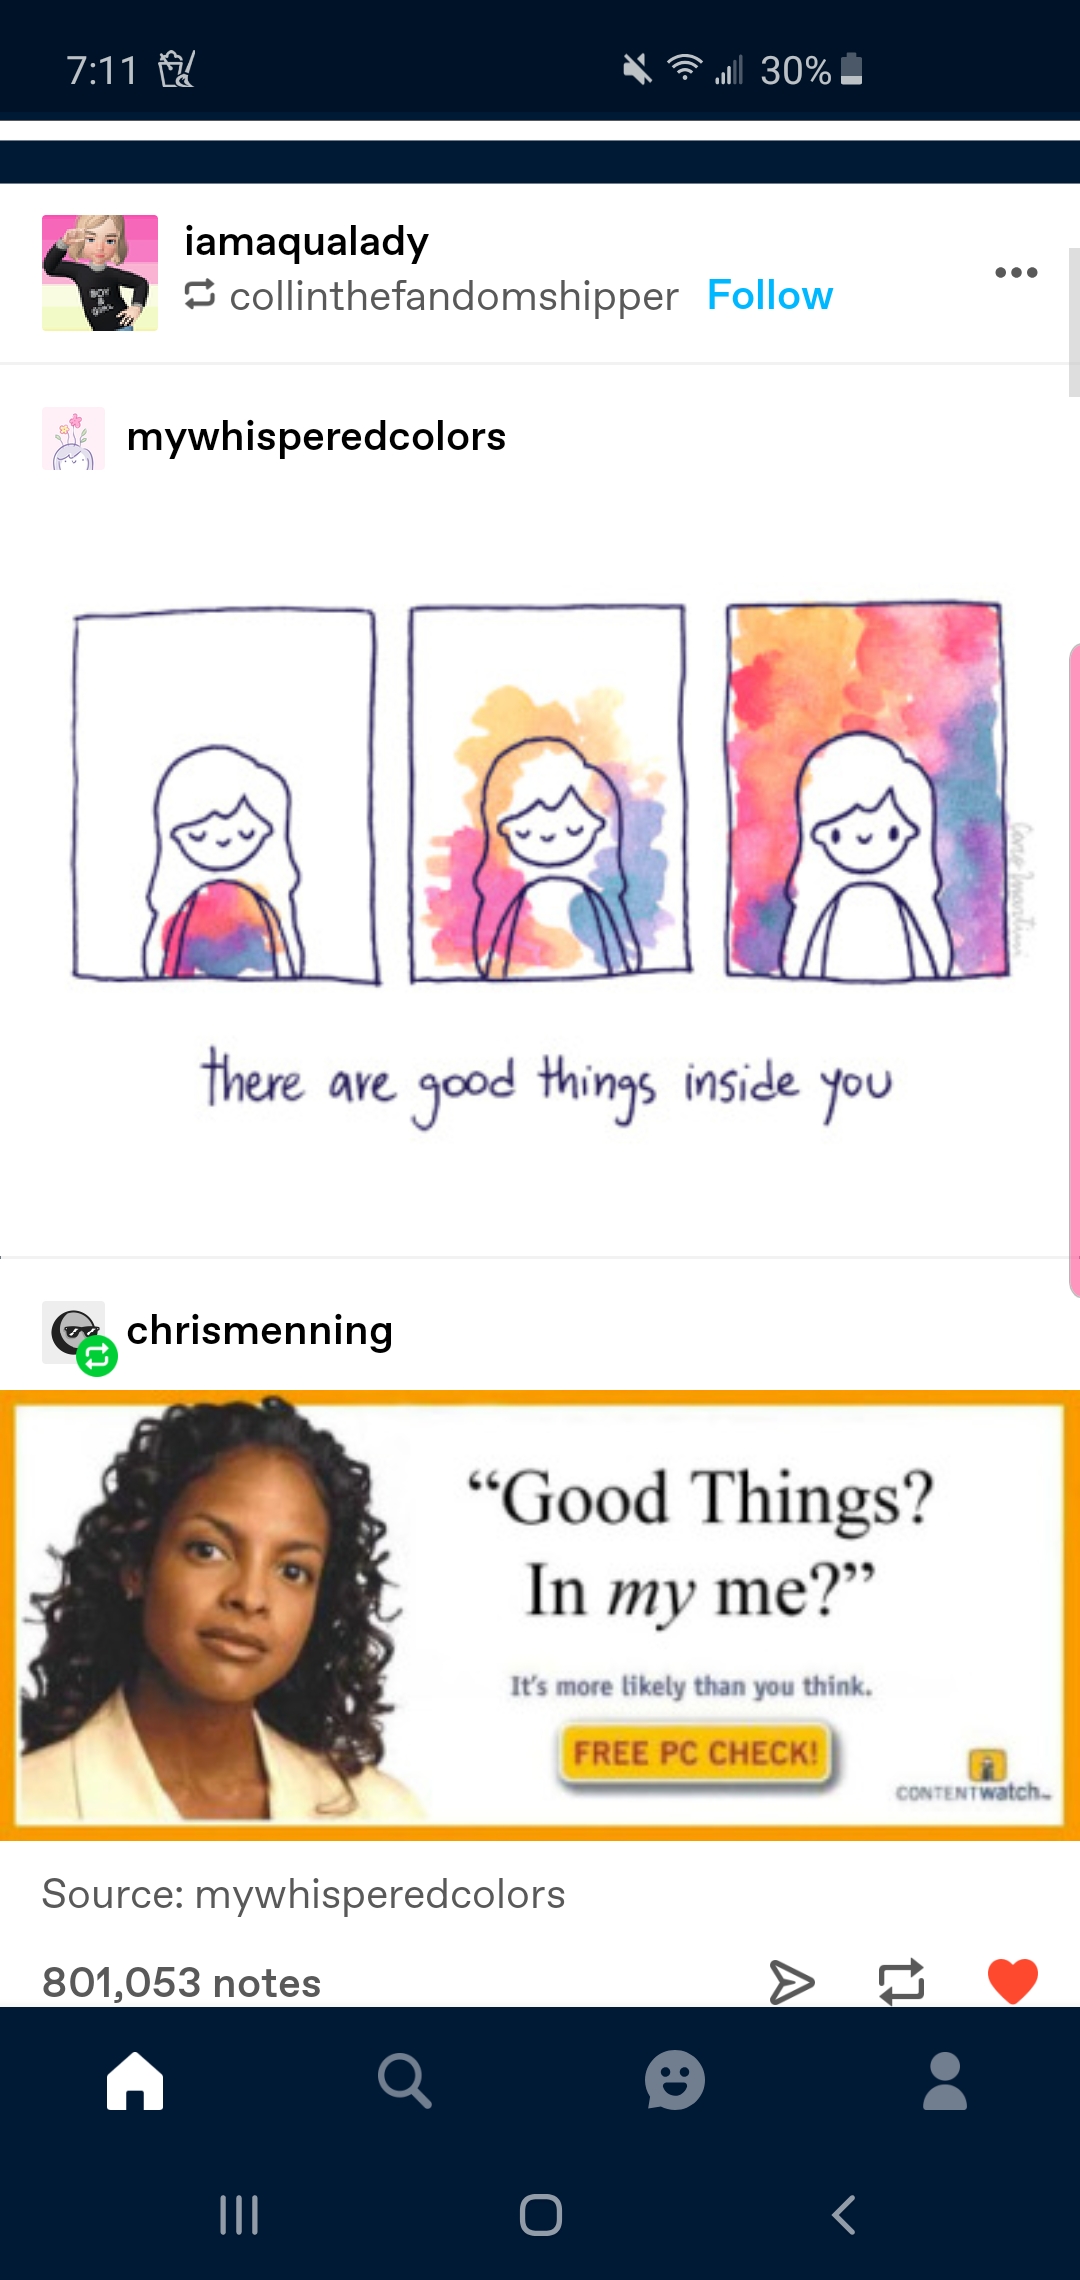 good things in my me it's more likely than you think - x 30%. lamaqualady Scollinthefandomshipper mywhisperedcolors there are good things inside you "Good Things? In my me?" Free Pc Chego Source mywhisperedcolors 801,053 notes